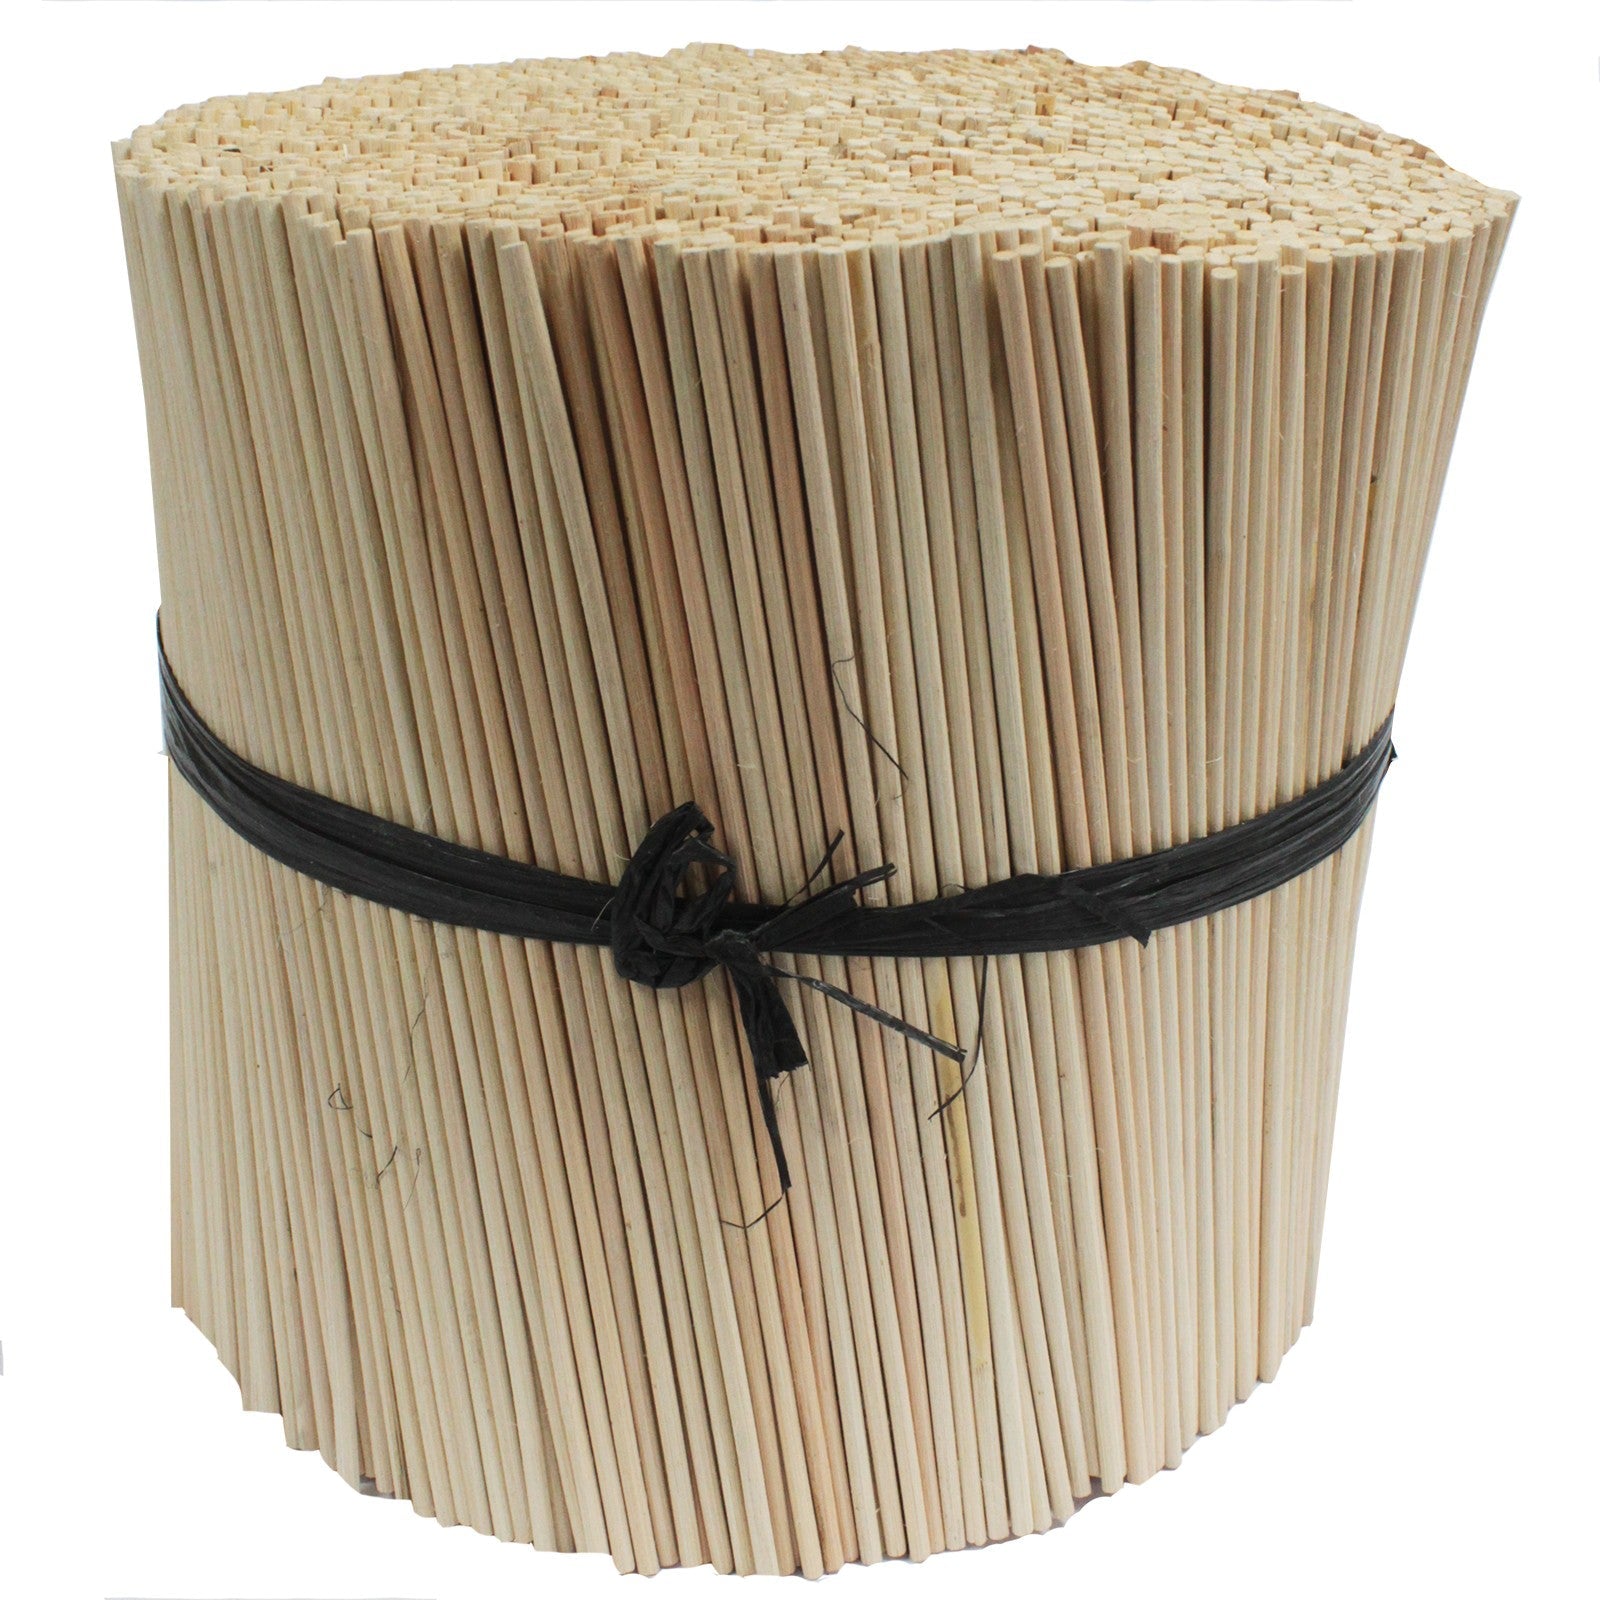 View 5kg of 3mm Reed Diffusers Approx 3600 information